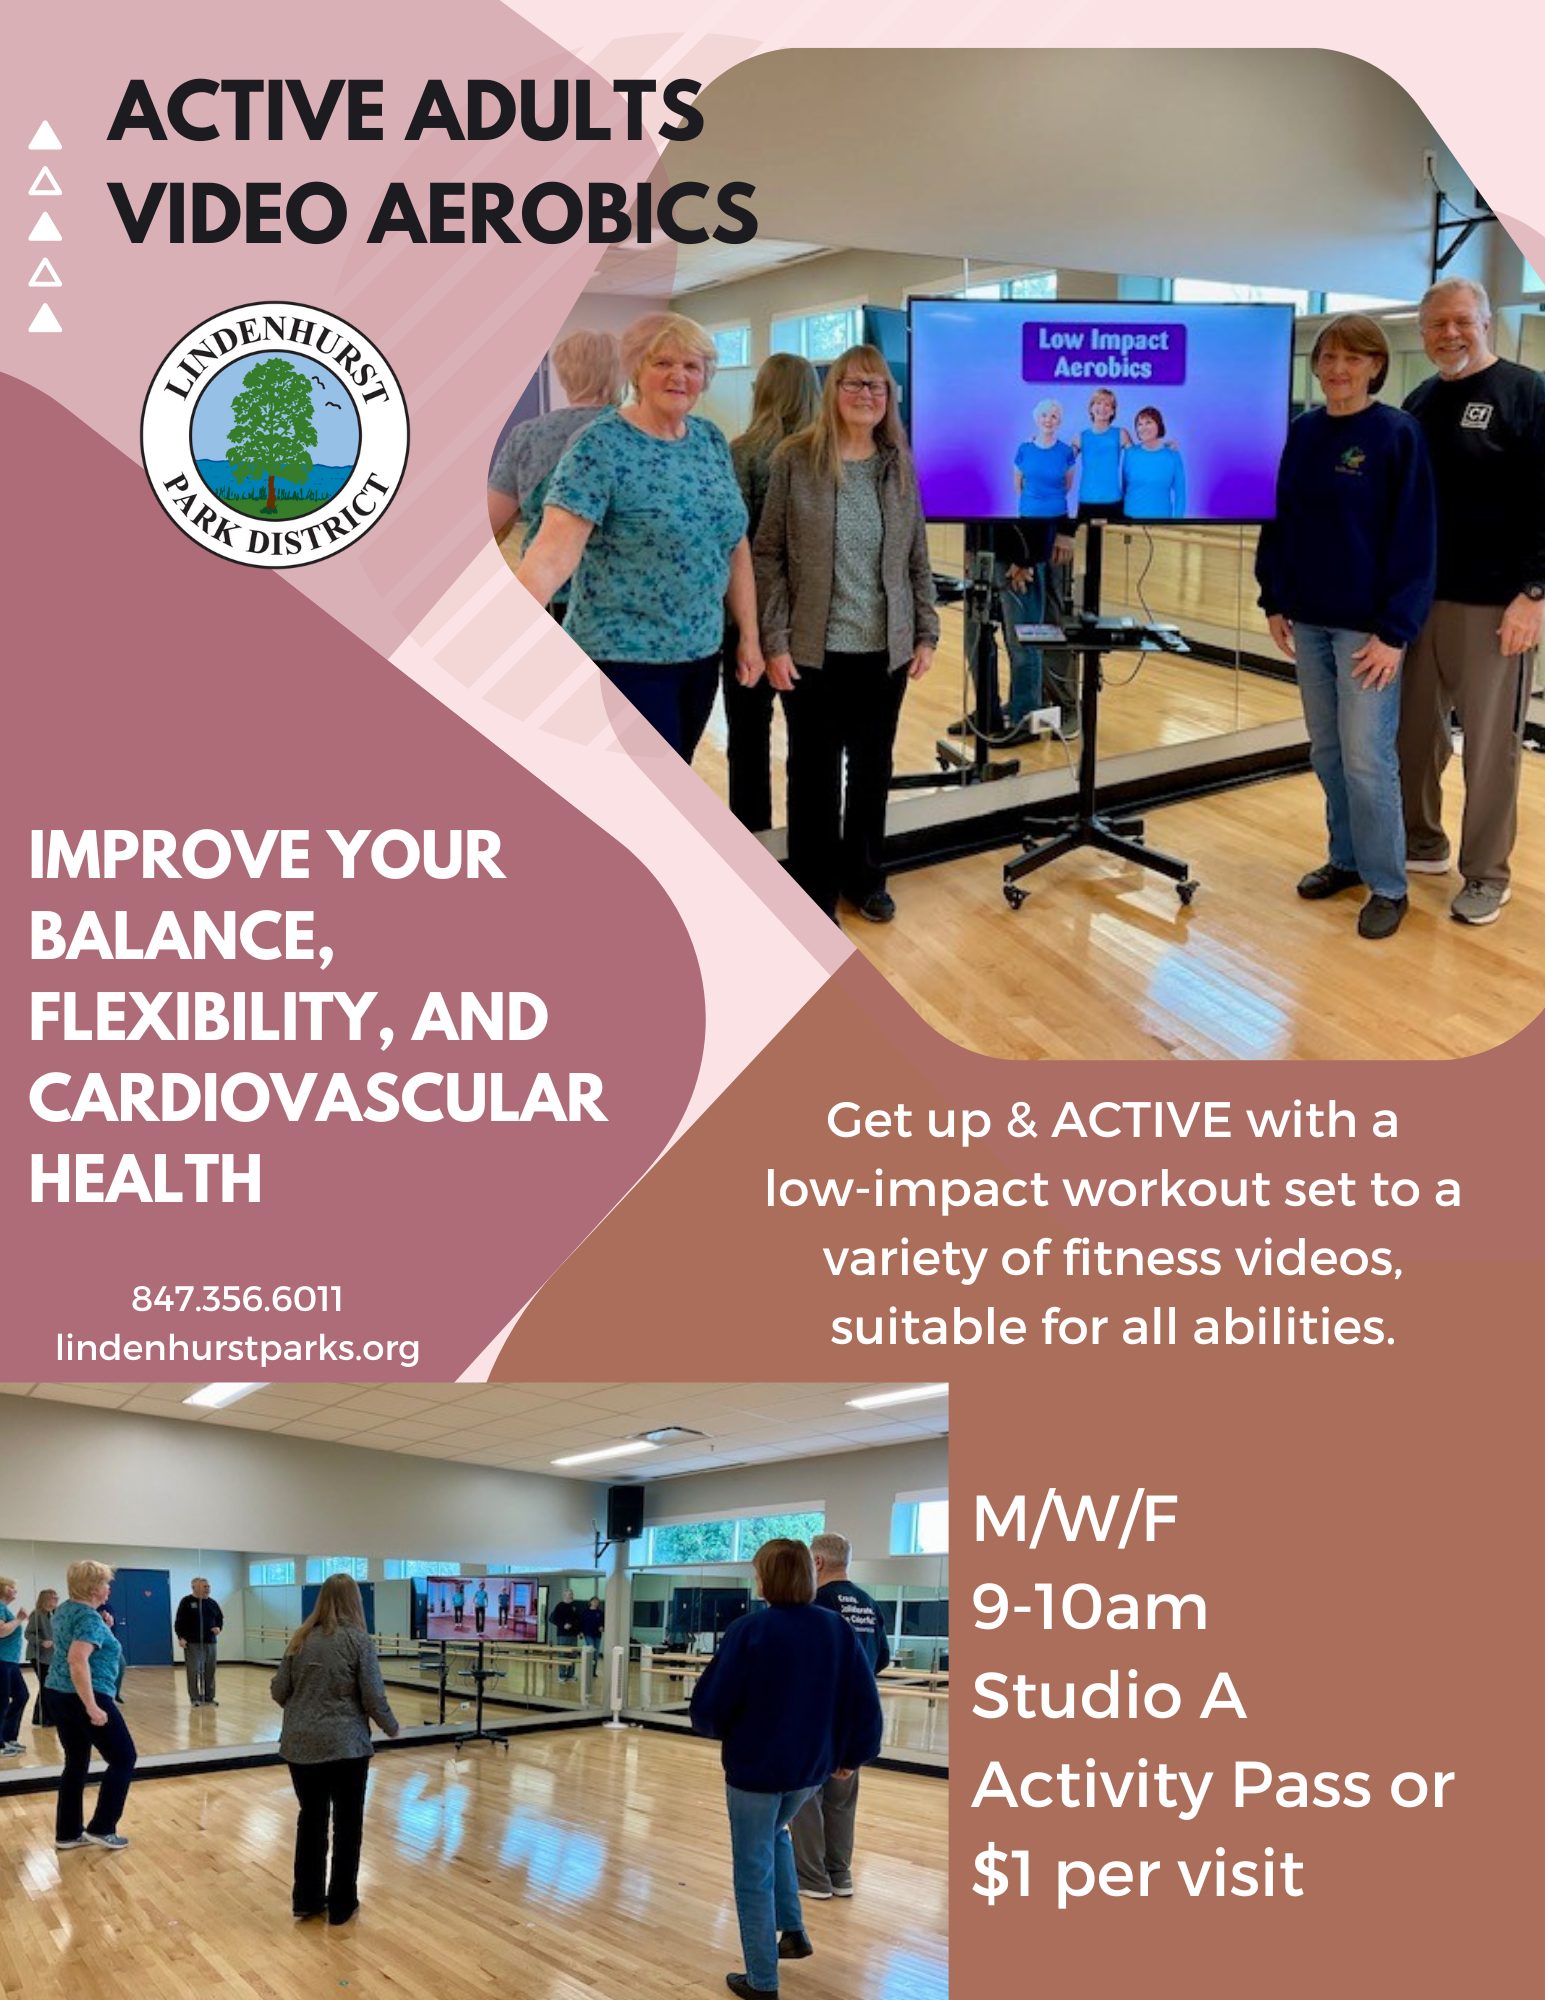 Flyer for "Active Adults Video Aerobics" at the Lindenhurst Park District promoting balance, flexibility, and cardiovascular health. It shows a group of adults in a fitness studio in front of a TV displaying a fitness video, with details: sessions on Monday, Wednesday, and Friday from 9-10am in Studio A, available with an Activity Pass or $1 per visit. Contact information is included.